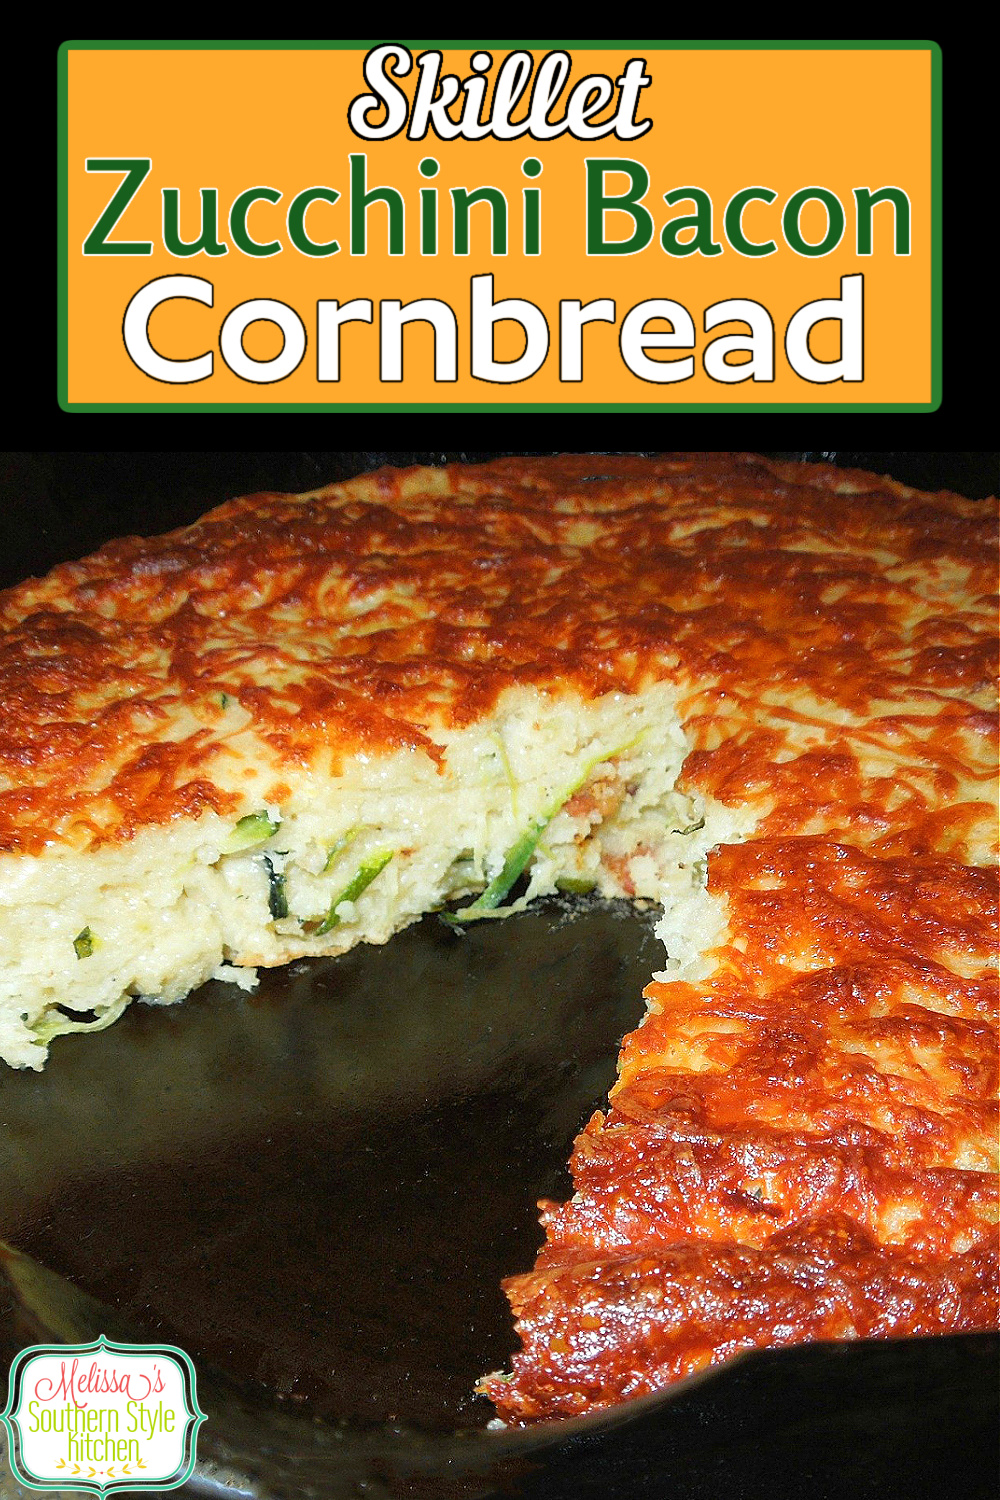 The addition of fresh zucchini and bacon takes classic skillet baked cornbread to another level of flavor #cornbread #baconcornbread #zucchini #zucchinirecipes #freshzucchini #cornbreadrecipes #bacon #southerncornbread #southernfood #southernrecipes